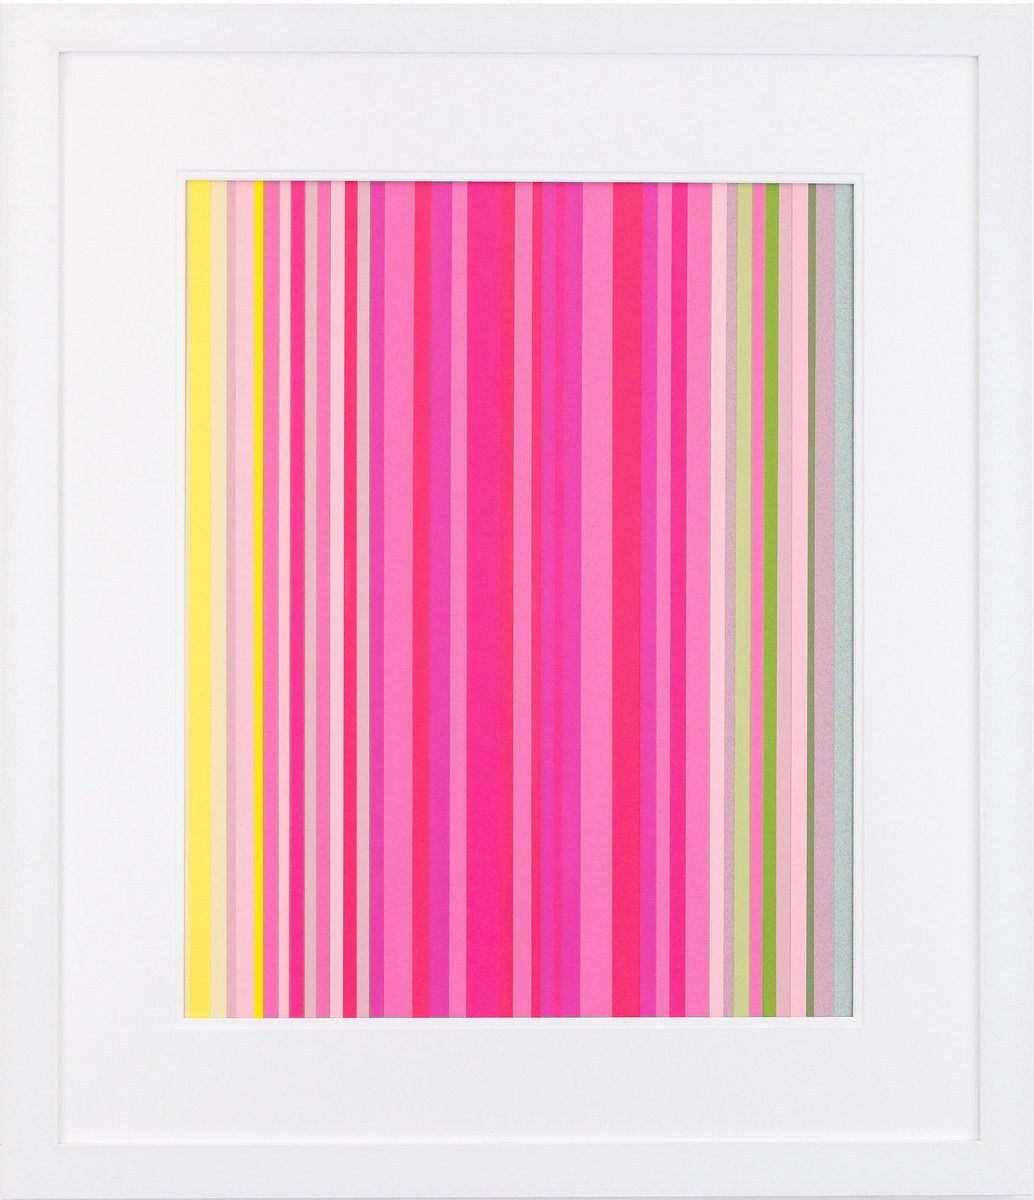 Tuesday - Day Colour Series - Pink by Brian Reinker